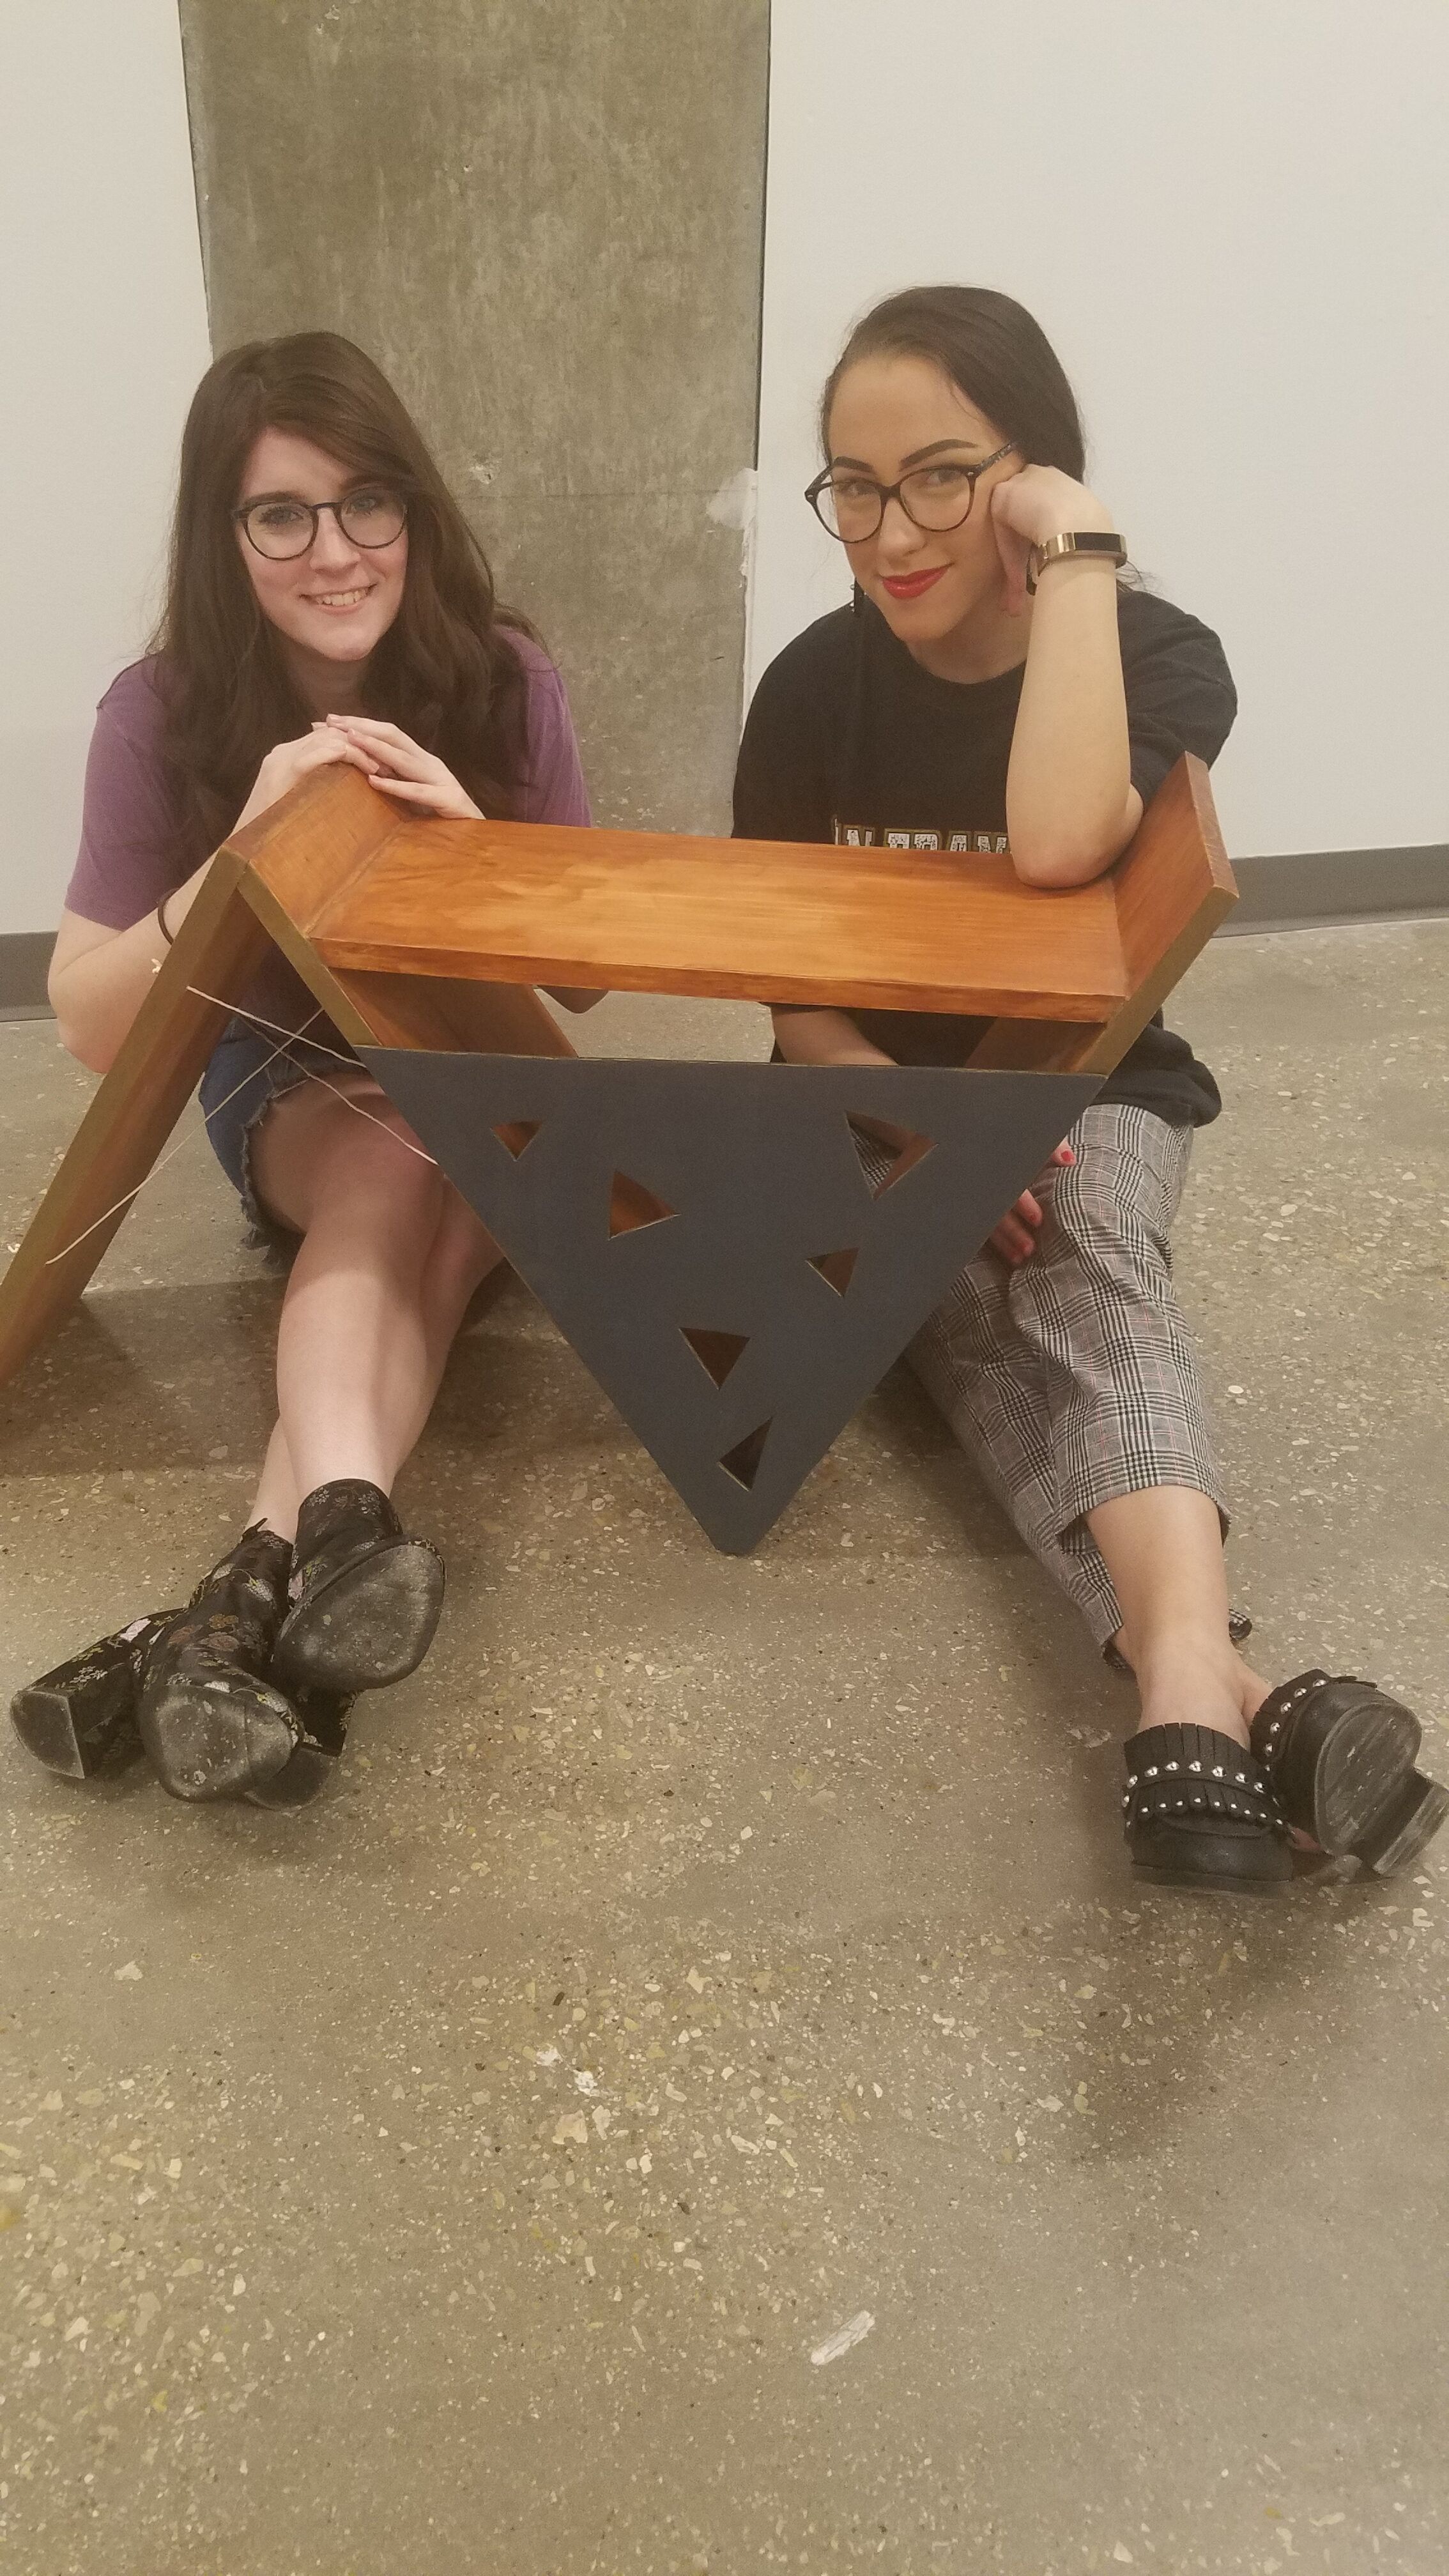 Abby Stephens and Josie King, Sculptures for a Cause